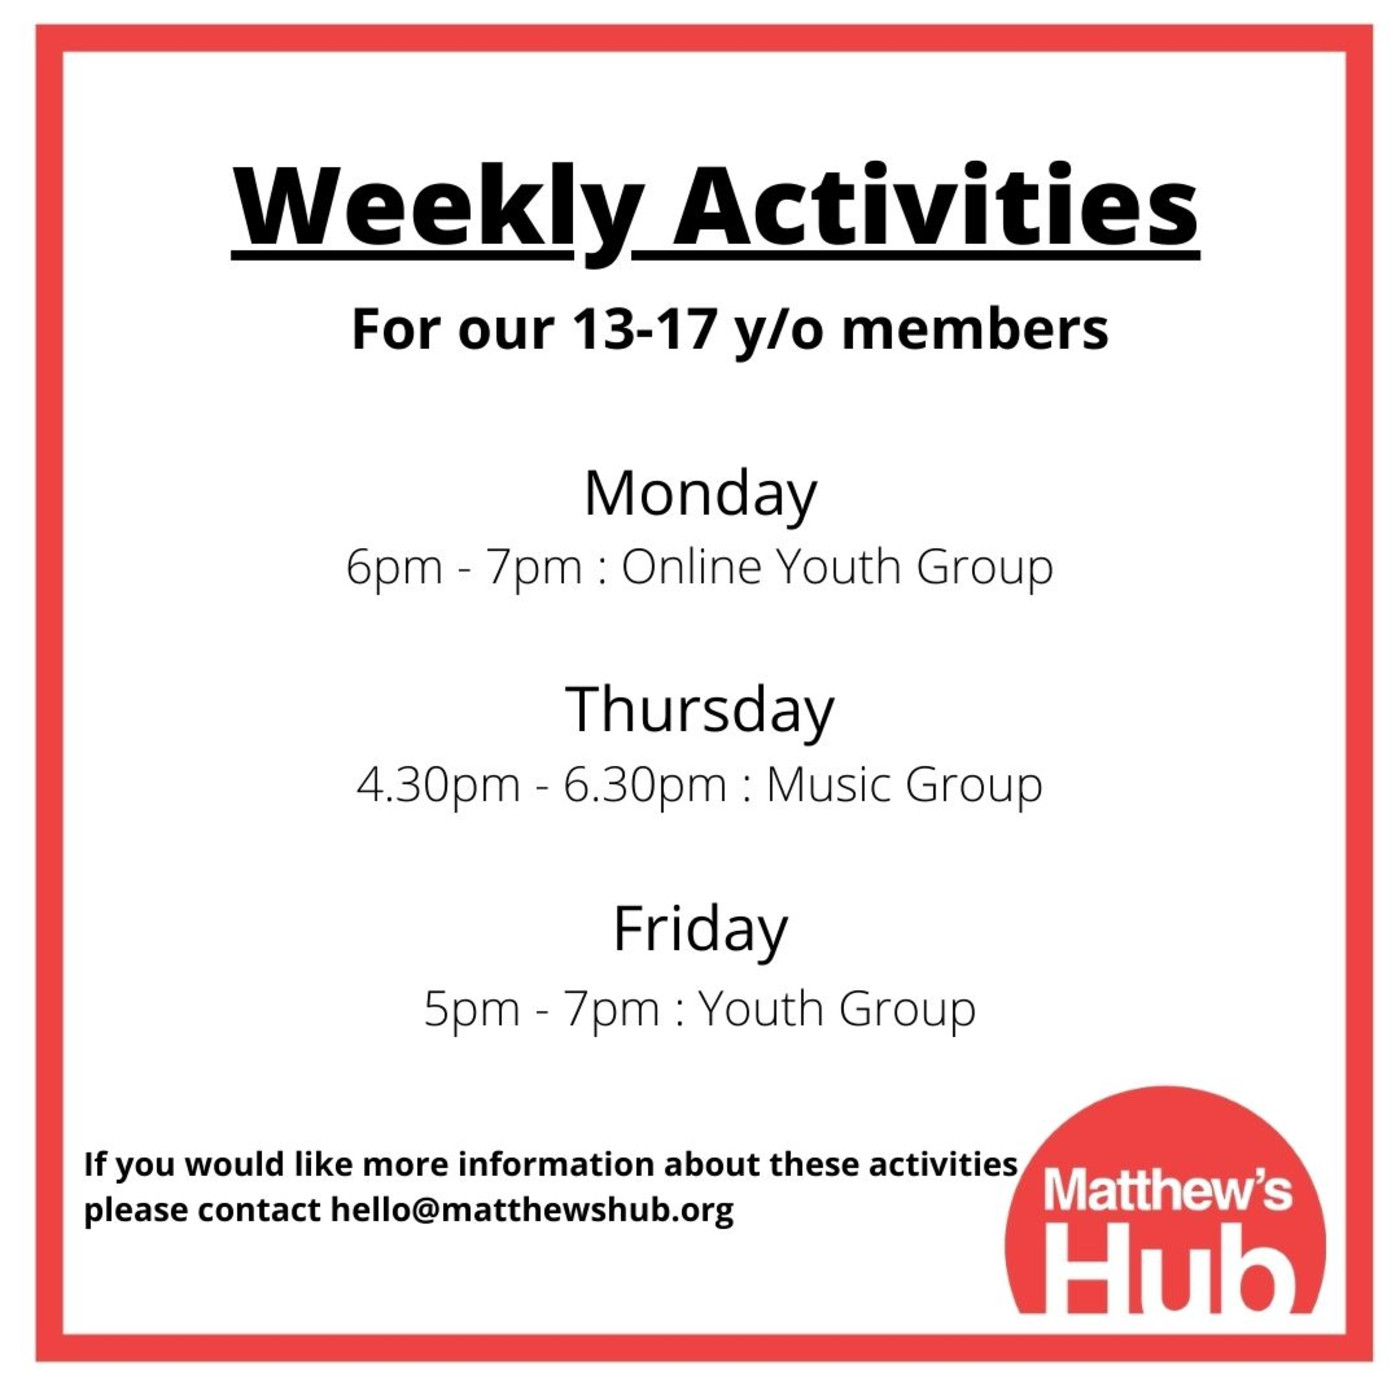 Weekly activities 13 17 without locations